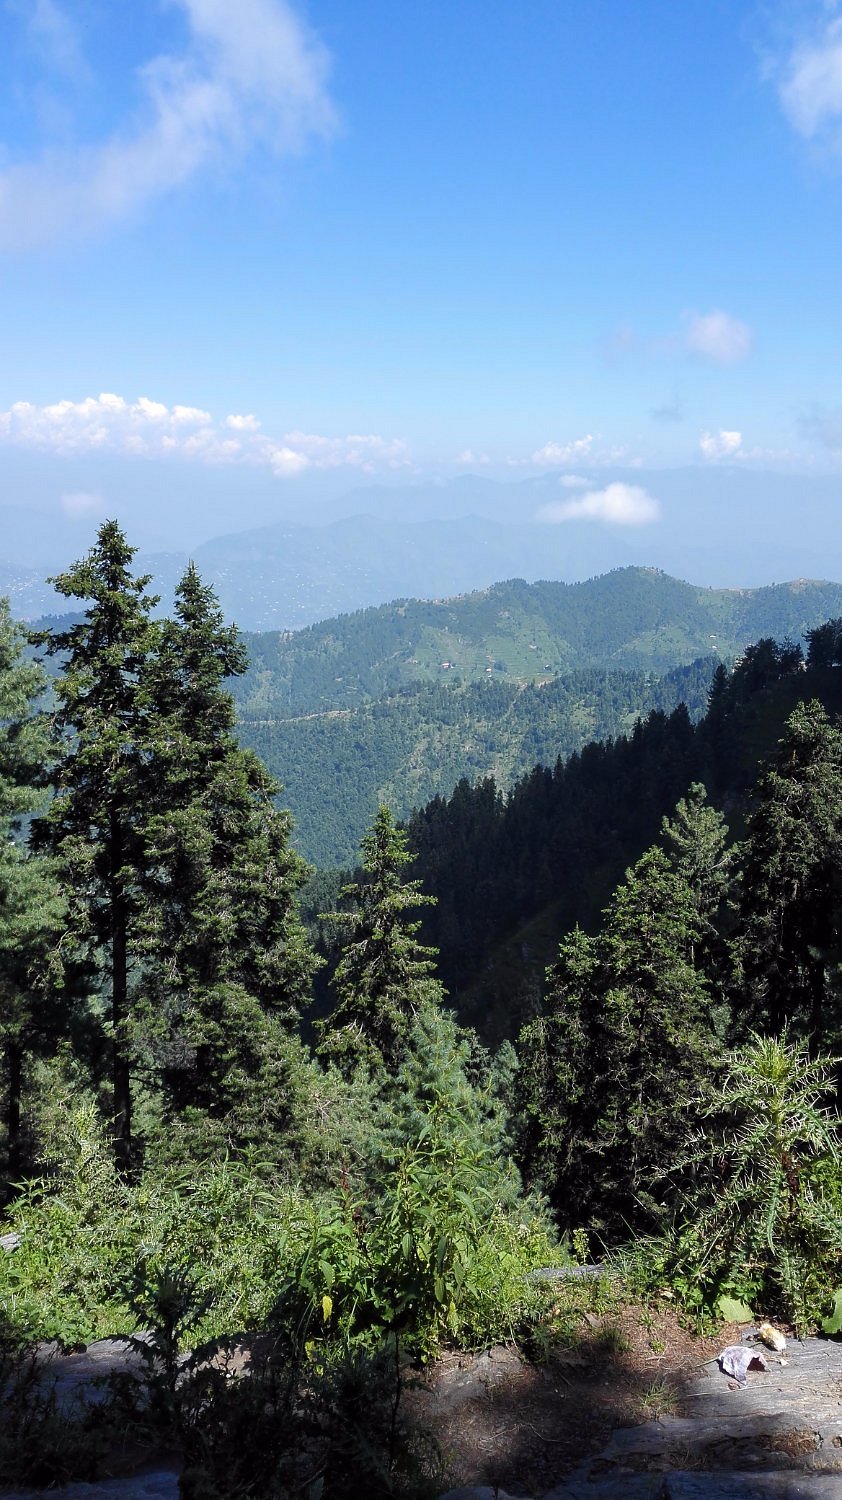 Summer in Malam Jabba is perfect for trekking